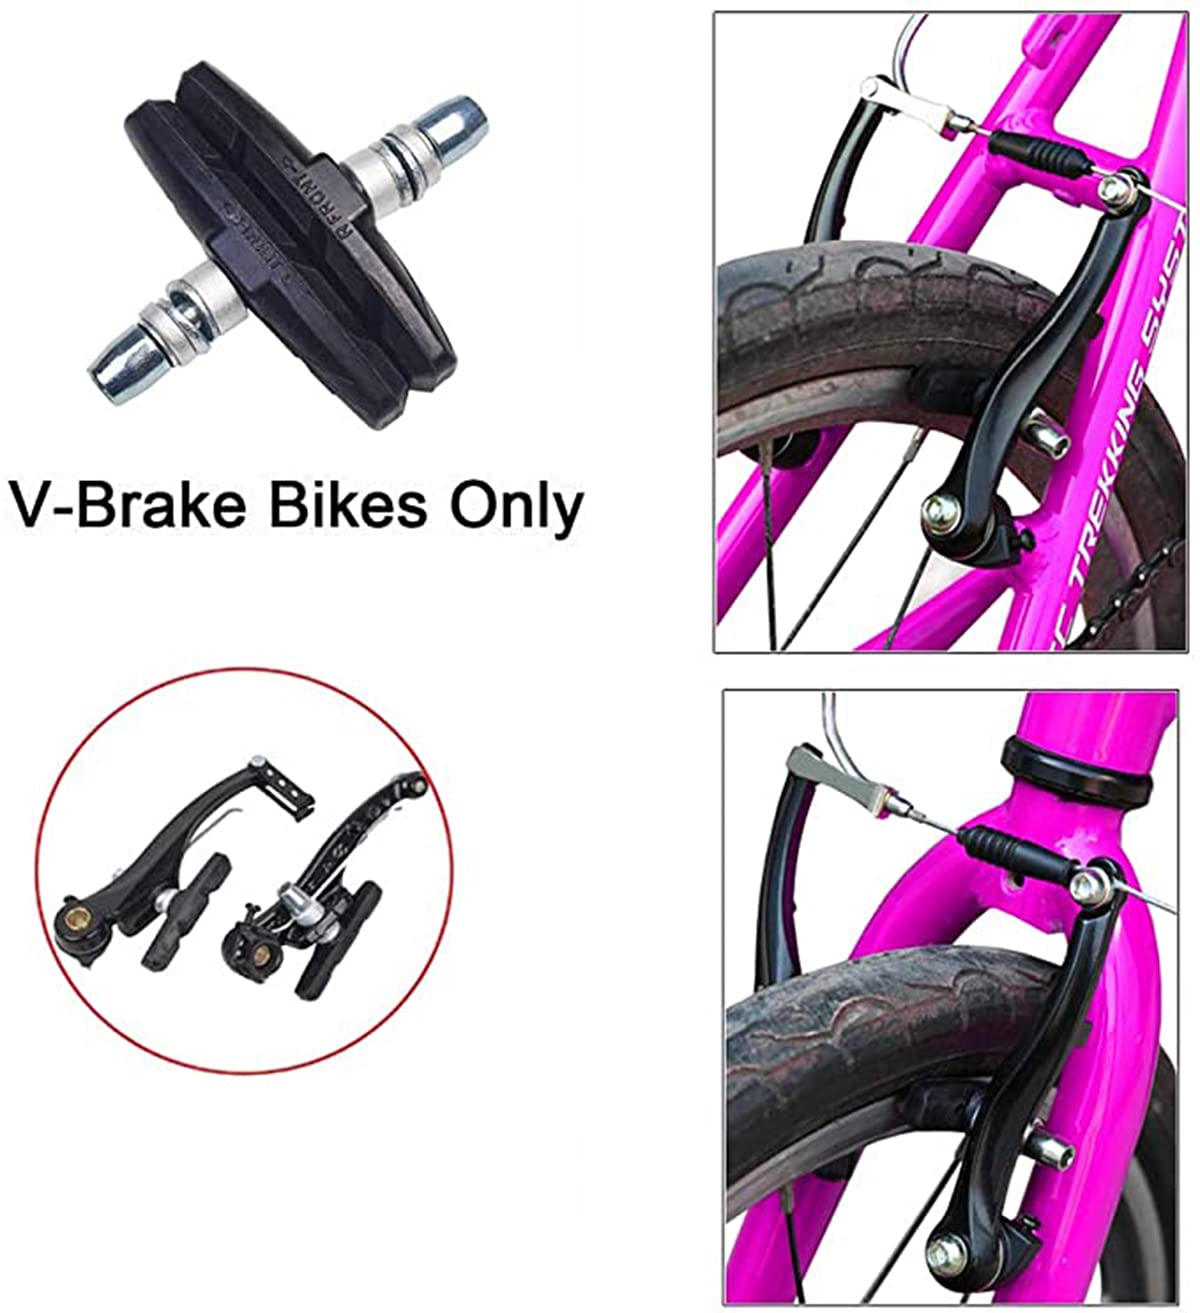 DELFINO No Noise No Skid Bike Brakes Pads Set, Professional Mountain and Road Bicycle V-Brake Pads, 70mm for Cruiser MTB Mountain Bicycle Universal V-Brake Blocks with Hex Nut and Shims